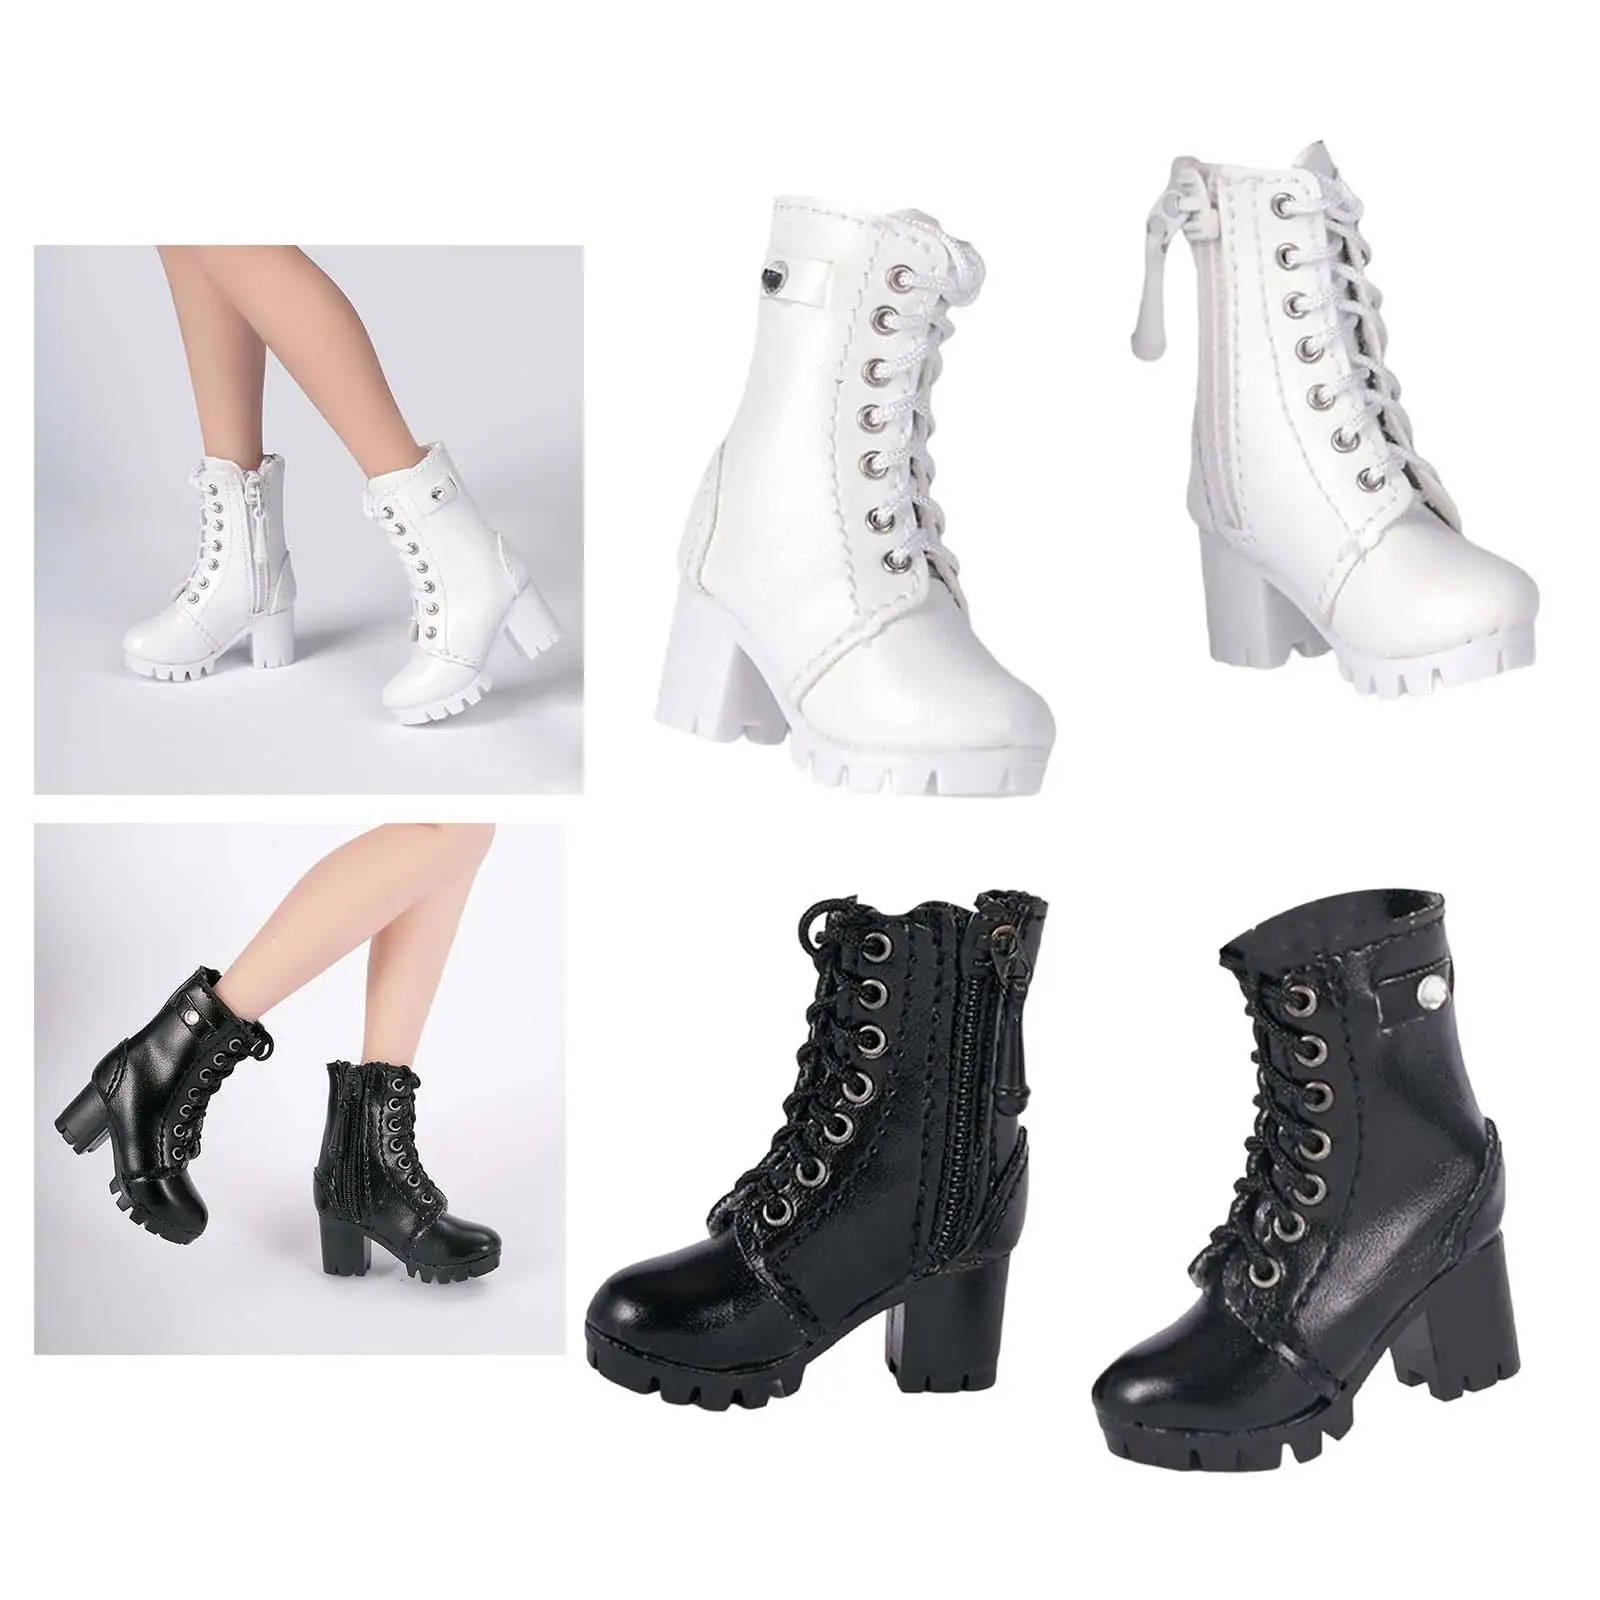 1:6 Scale High Heeled Shoes Boot for 12inch Women Figures Doll Model Dress up Accessories